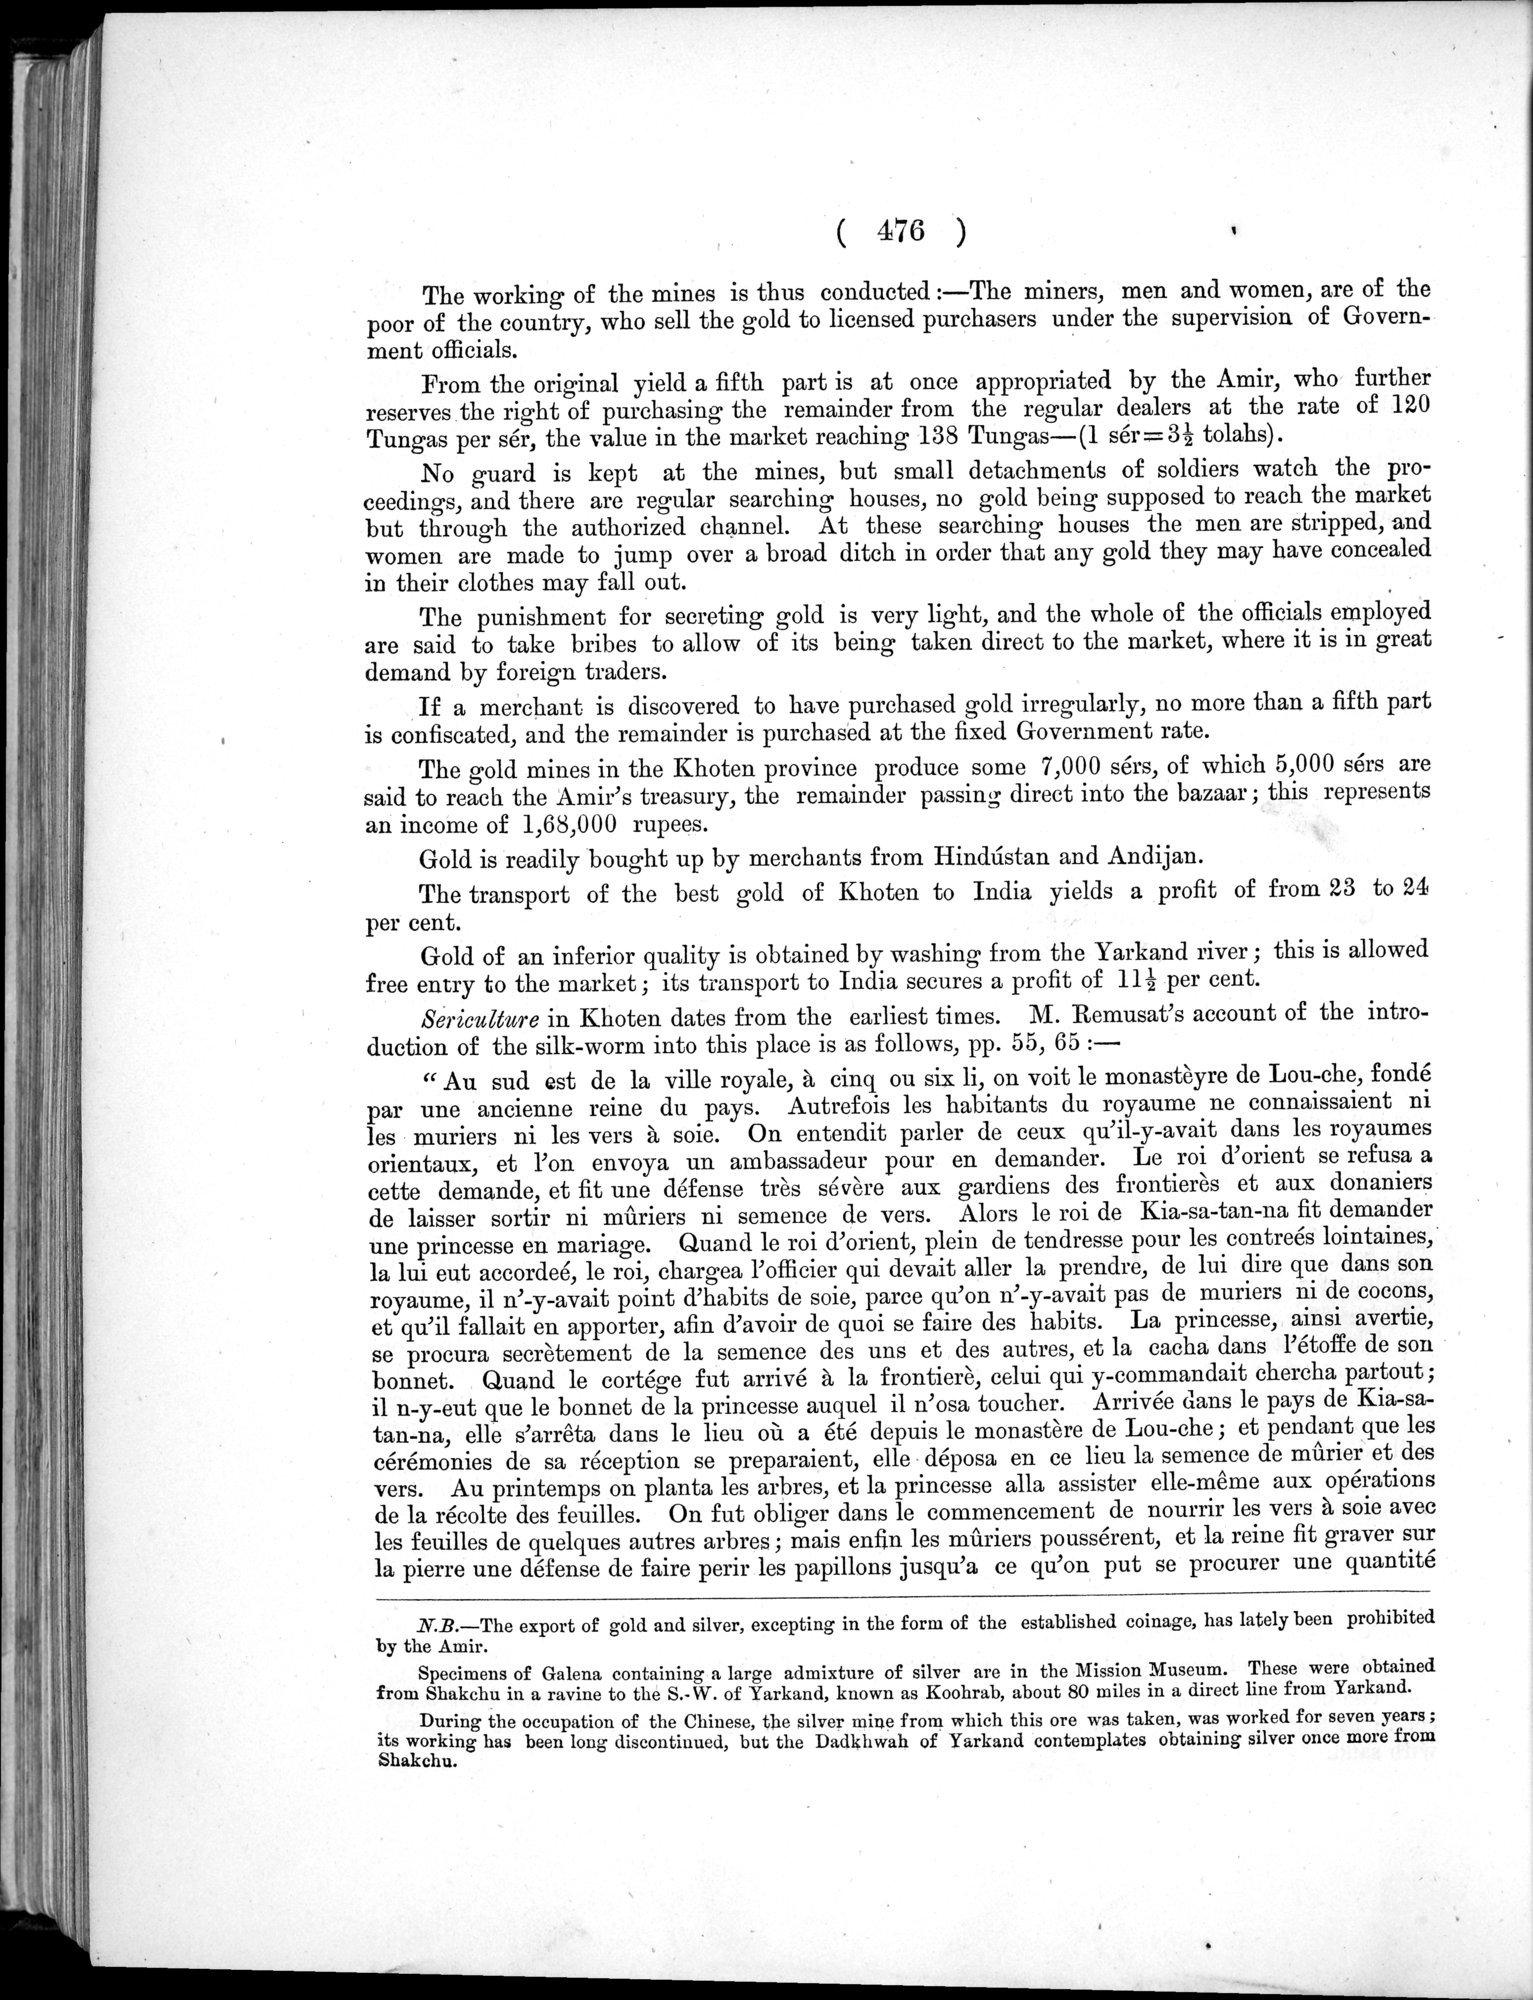 Report of a Mission to Yarkund in 1873 : vol.1 / Page 610 (Grayscale High Resolution Image)